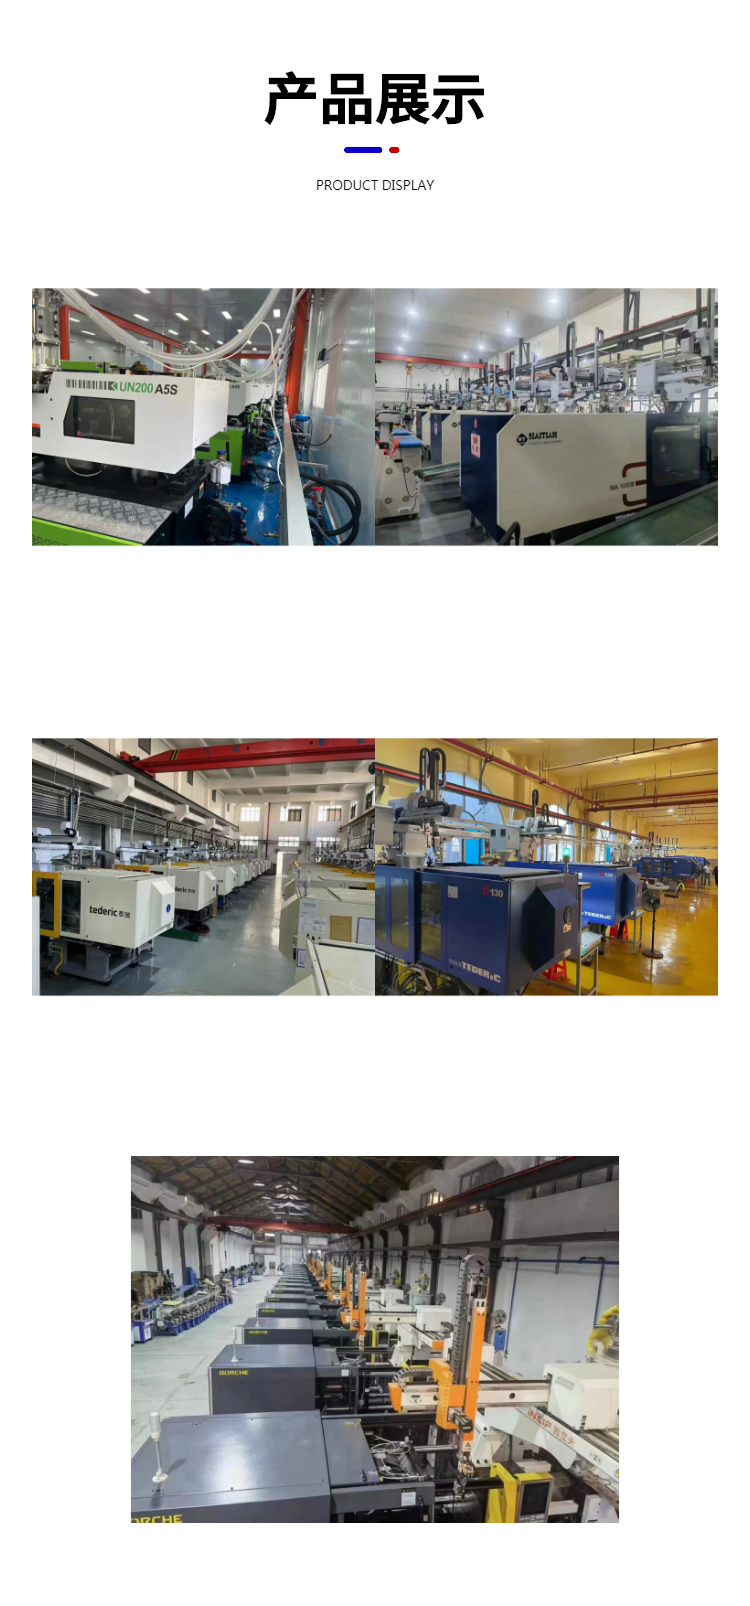 Factory Zhenxiong injection molding machines with a batch of models ranging from 80 tons to 320 variable displacement pump configurations